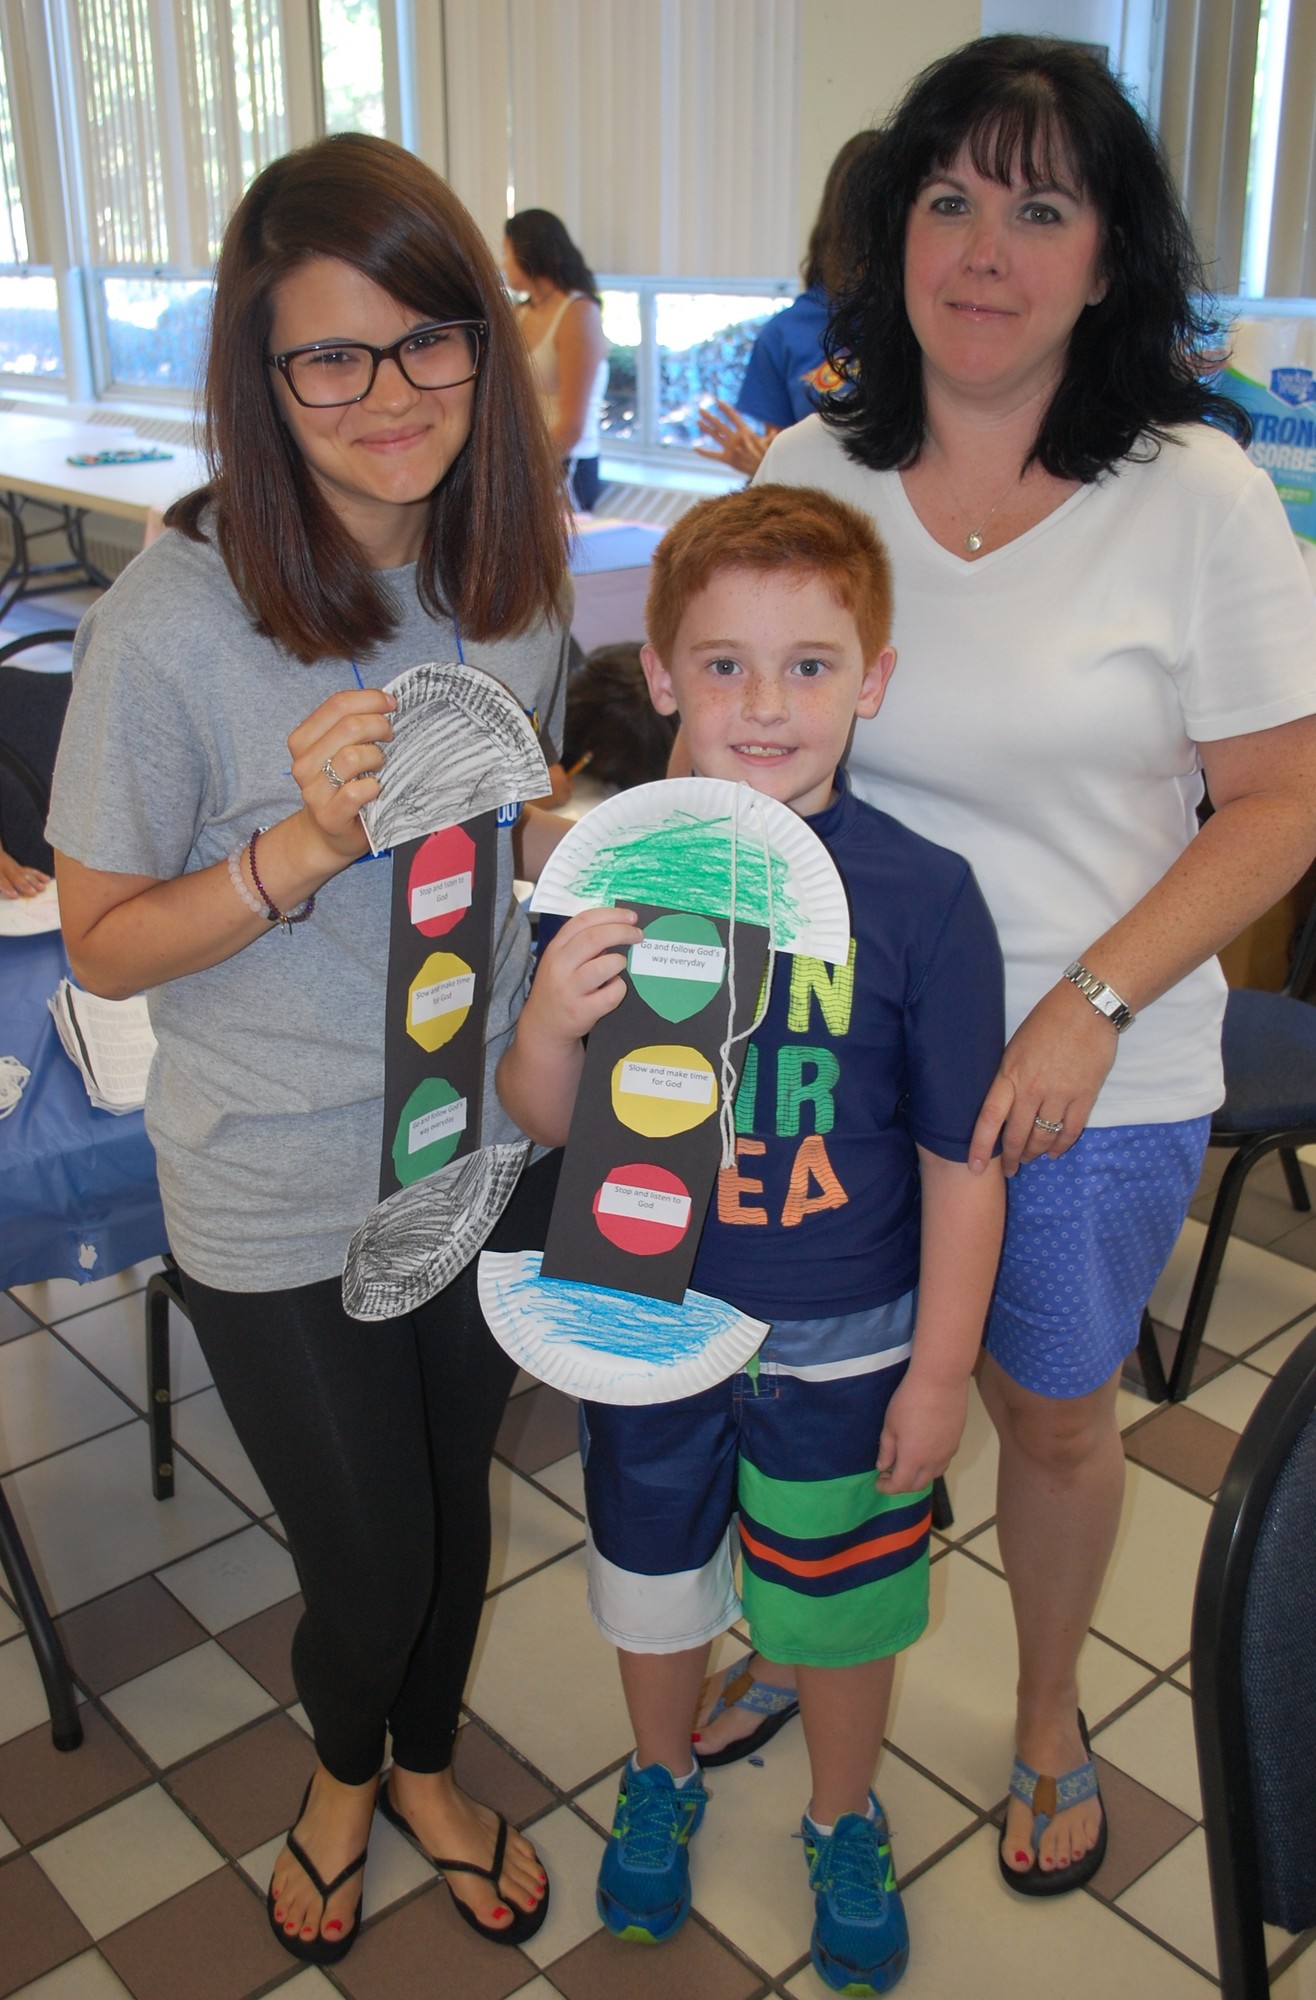 Arts and crafts director Michele Patti, left, with Matthew, 7, and Kim Rackley.